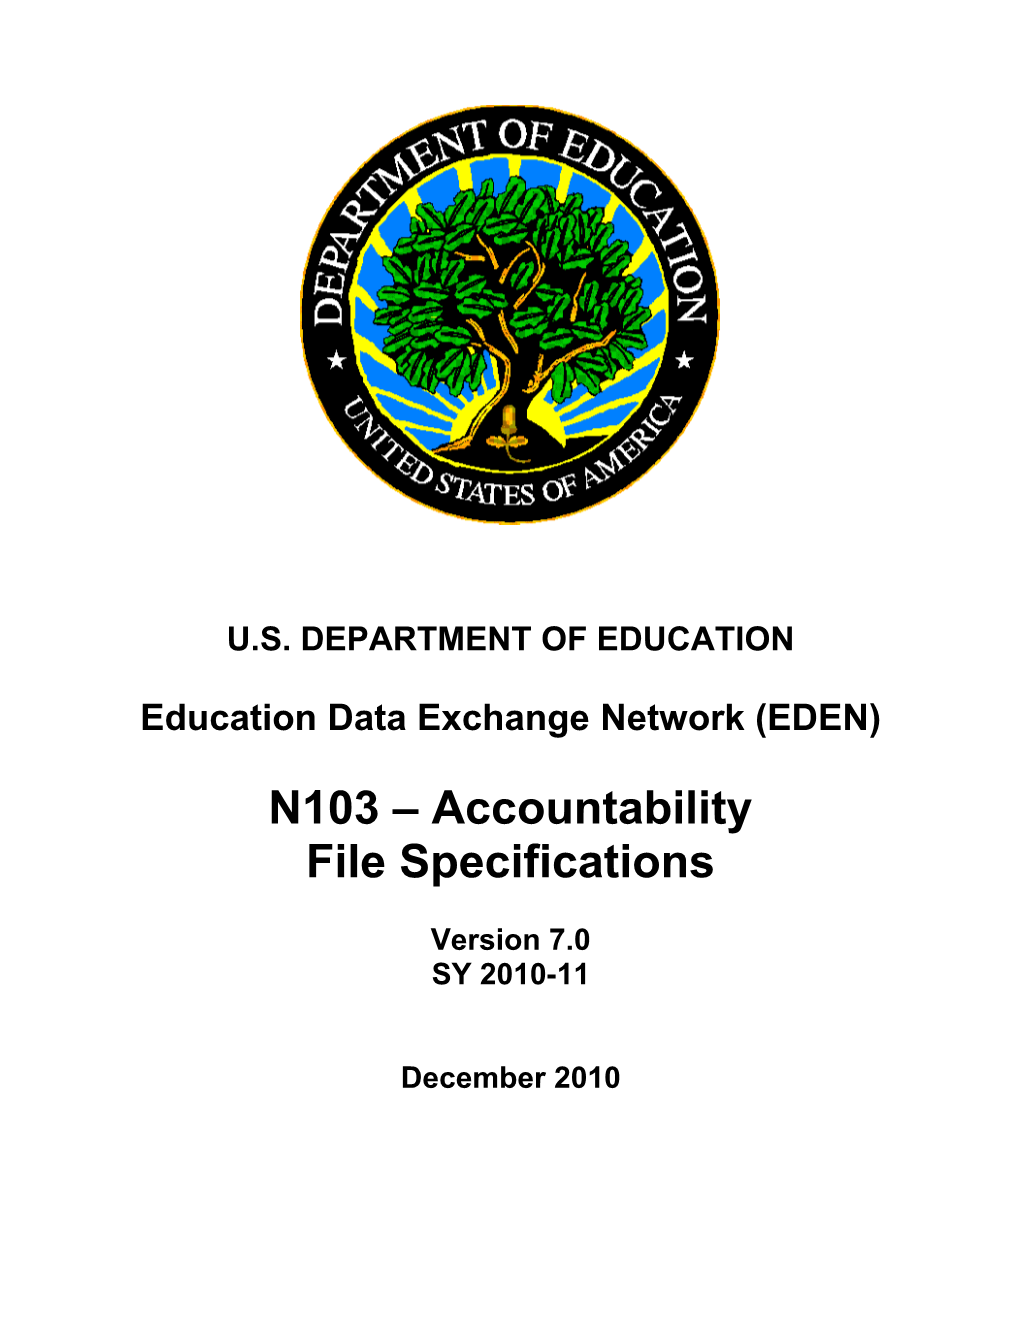 Accountability File Specifications